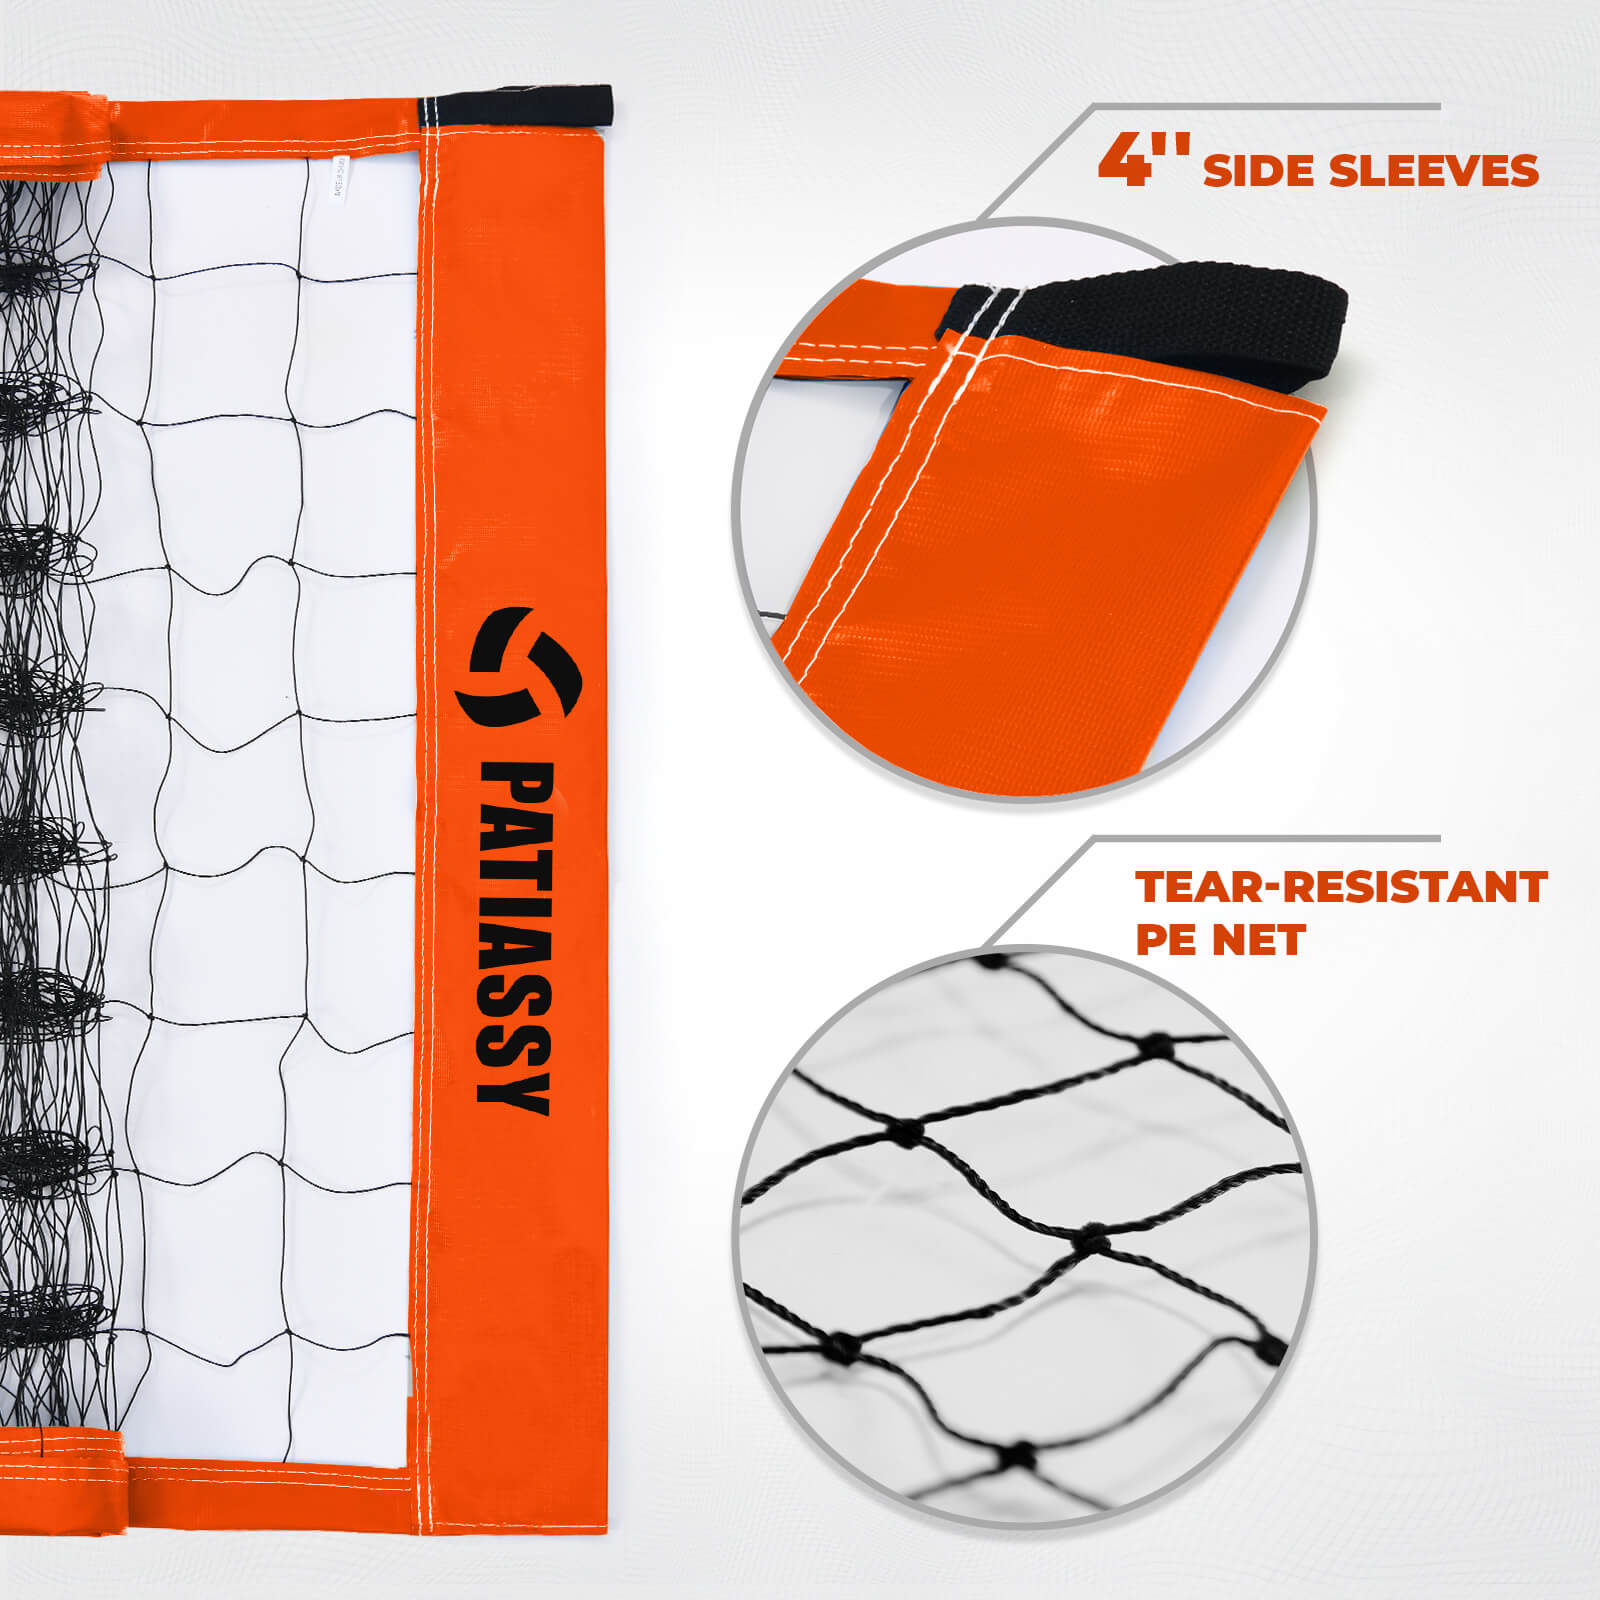 Patiassy Outdoor Portable Volleyball Net Set System for Backyard